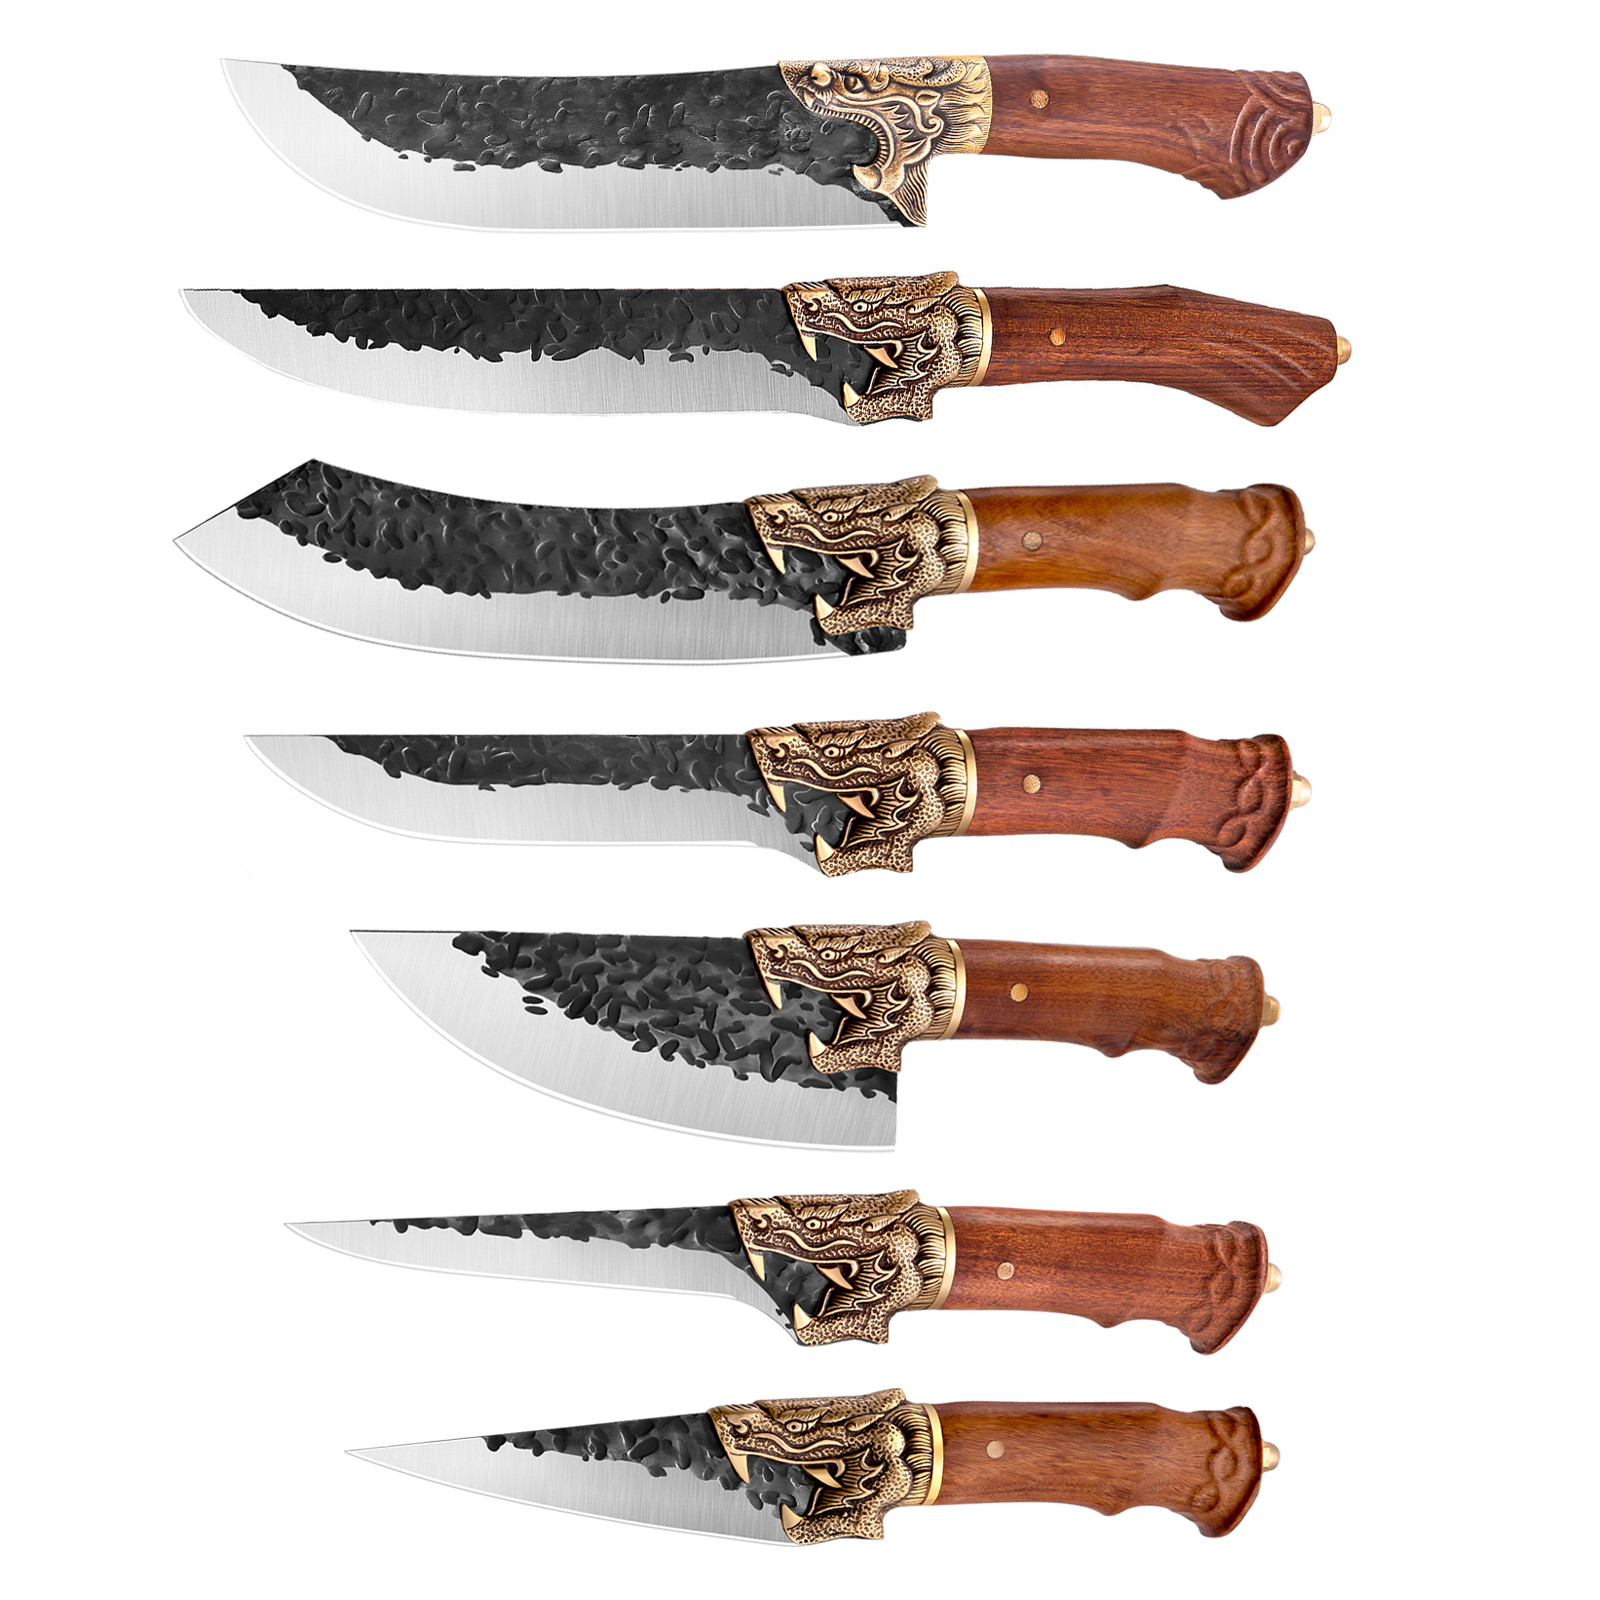 Dragon Series Set – HAND FORGED KNIFE